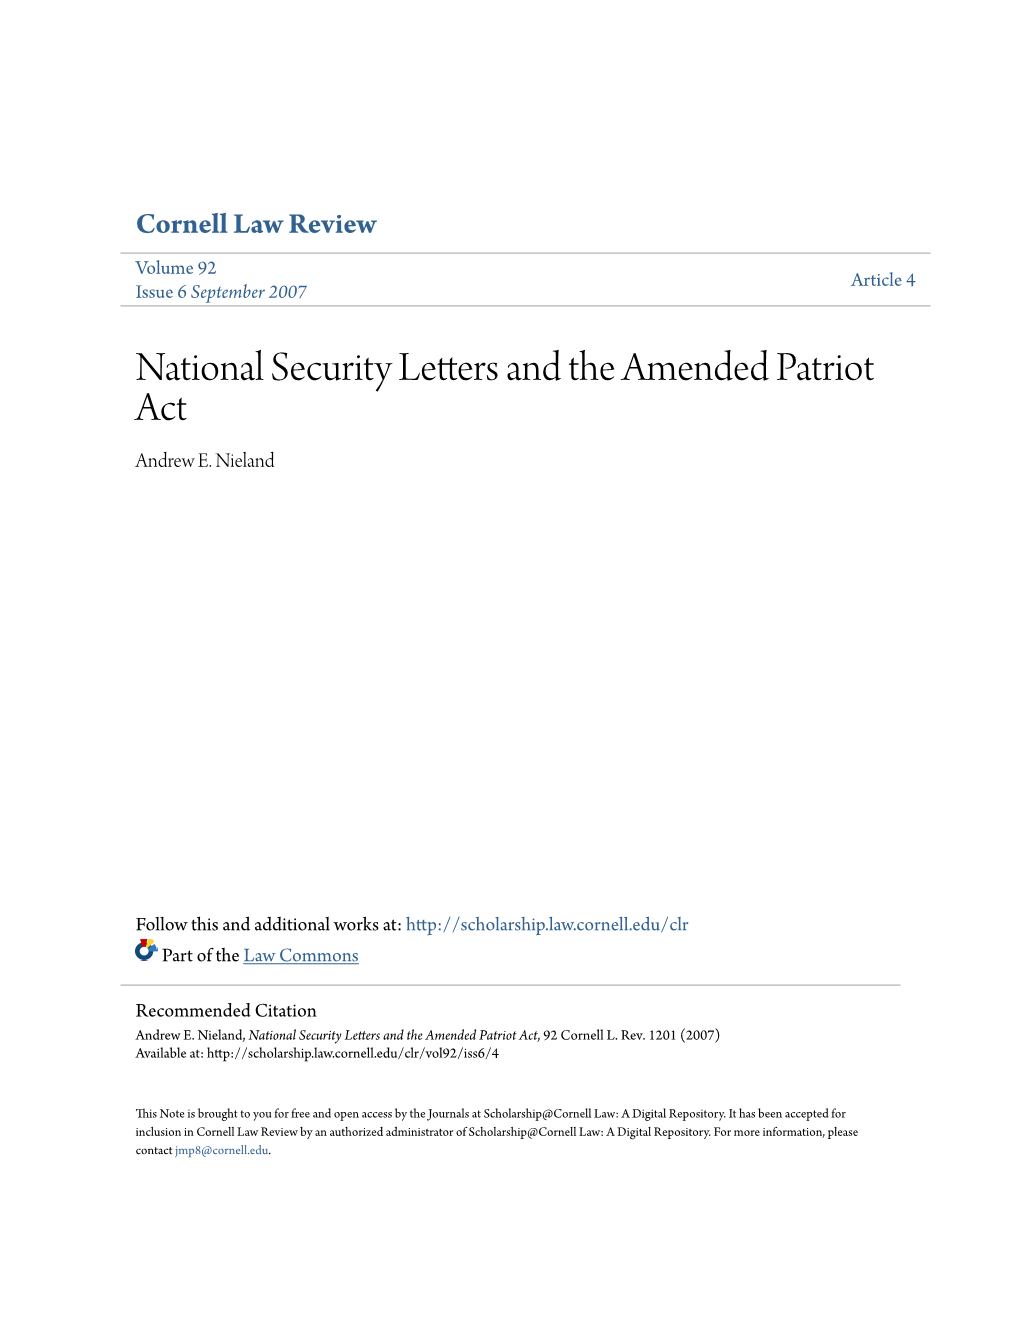 National Security Letters and the Amended Patriot Act Andrew E